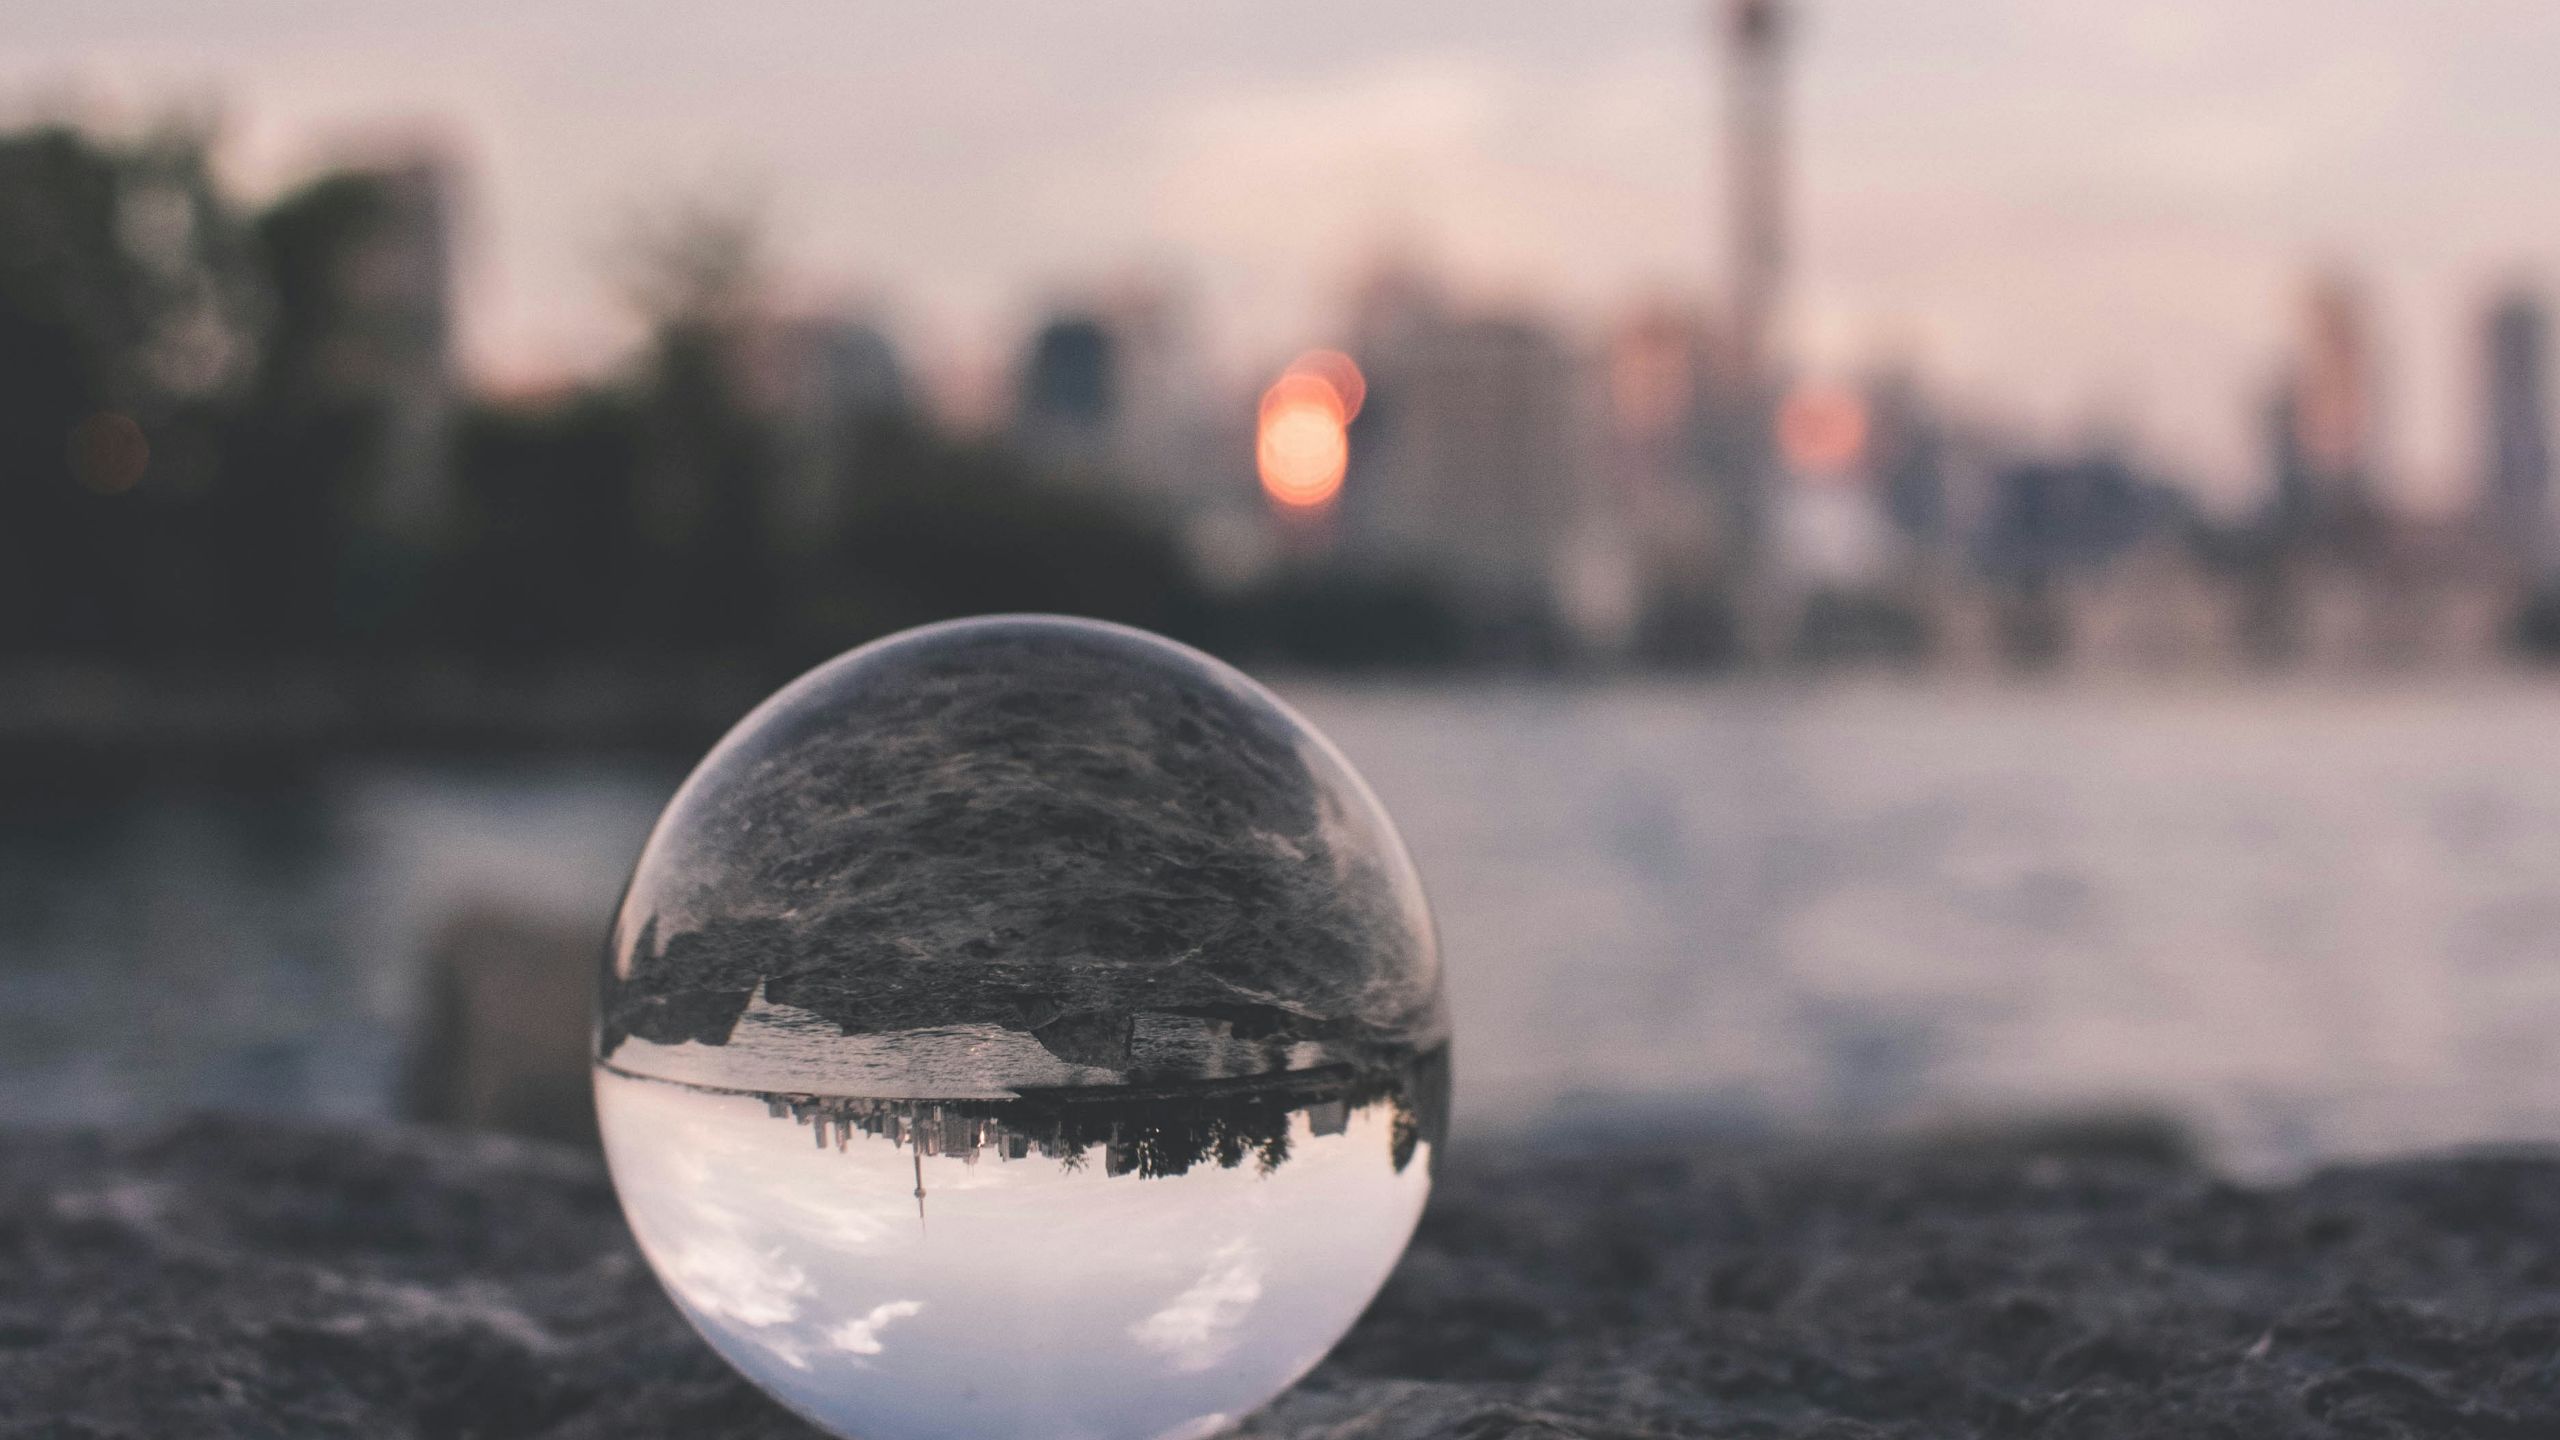 City and river reflected in glass ball